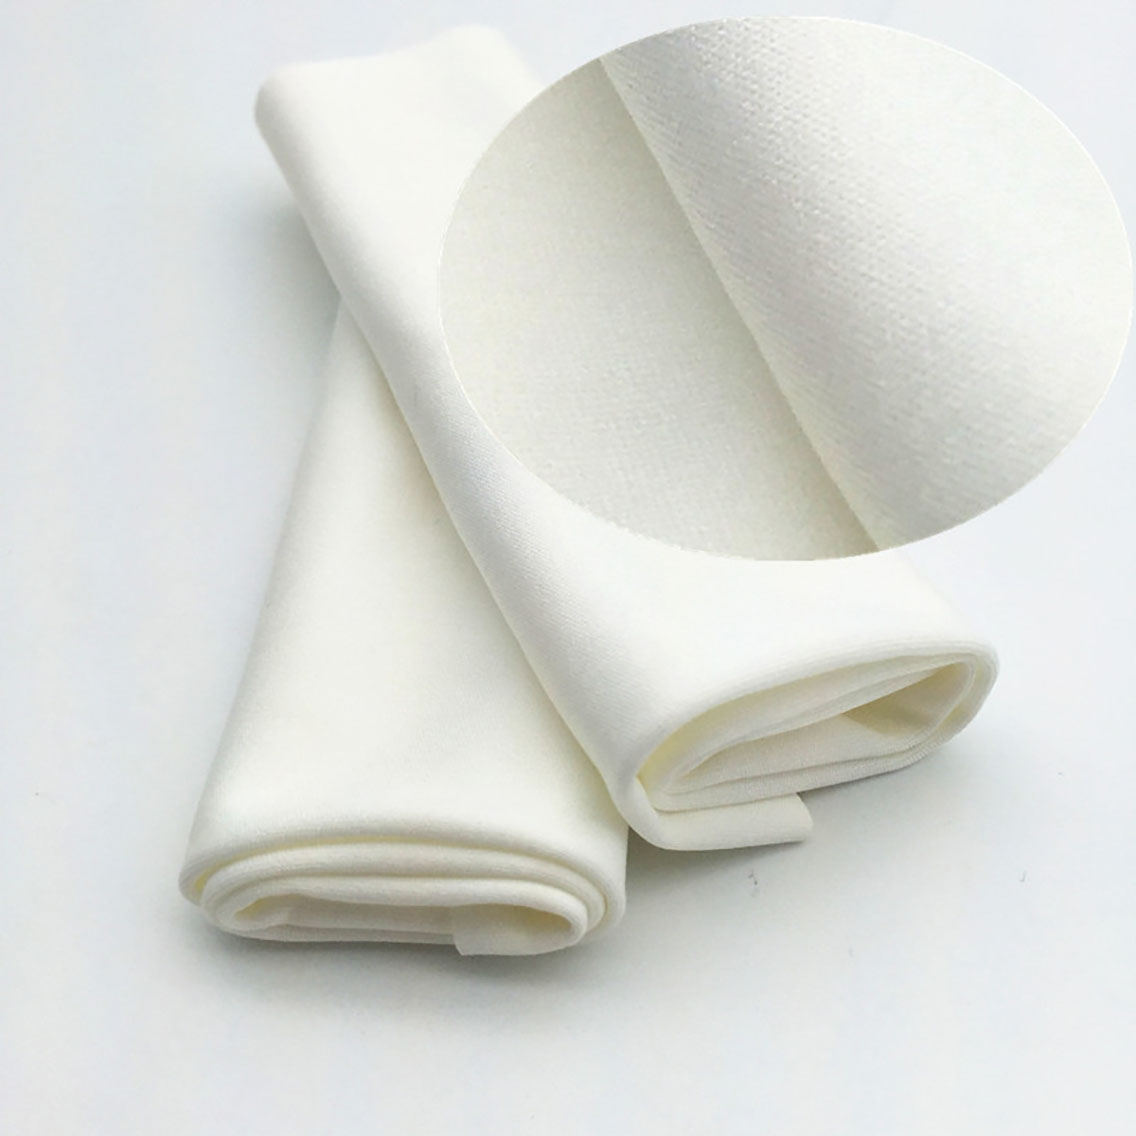 Cleanmo 30% nylon lens cloth wholesale for medical device products-2